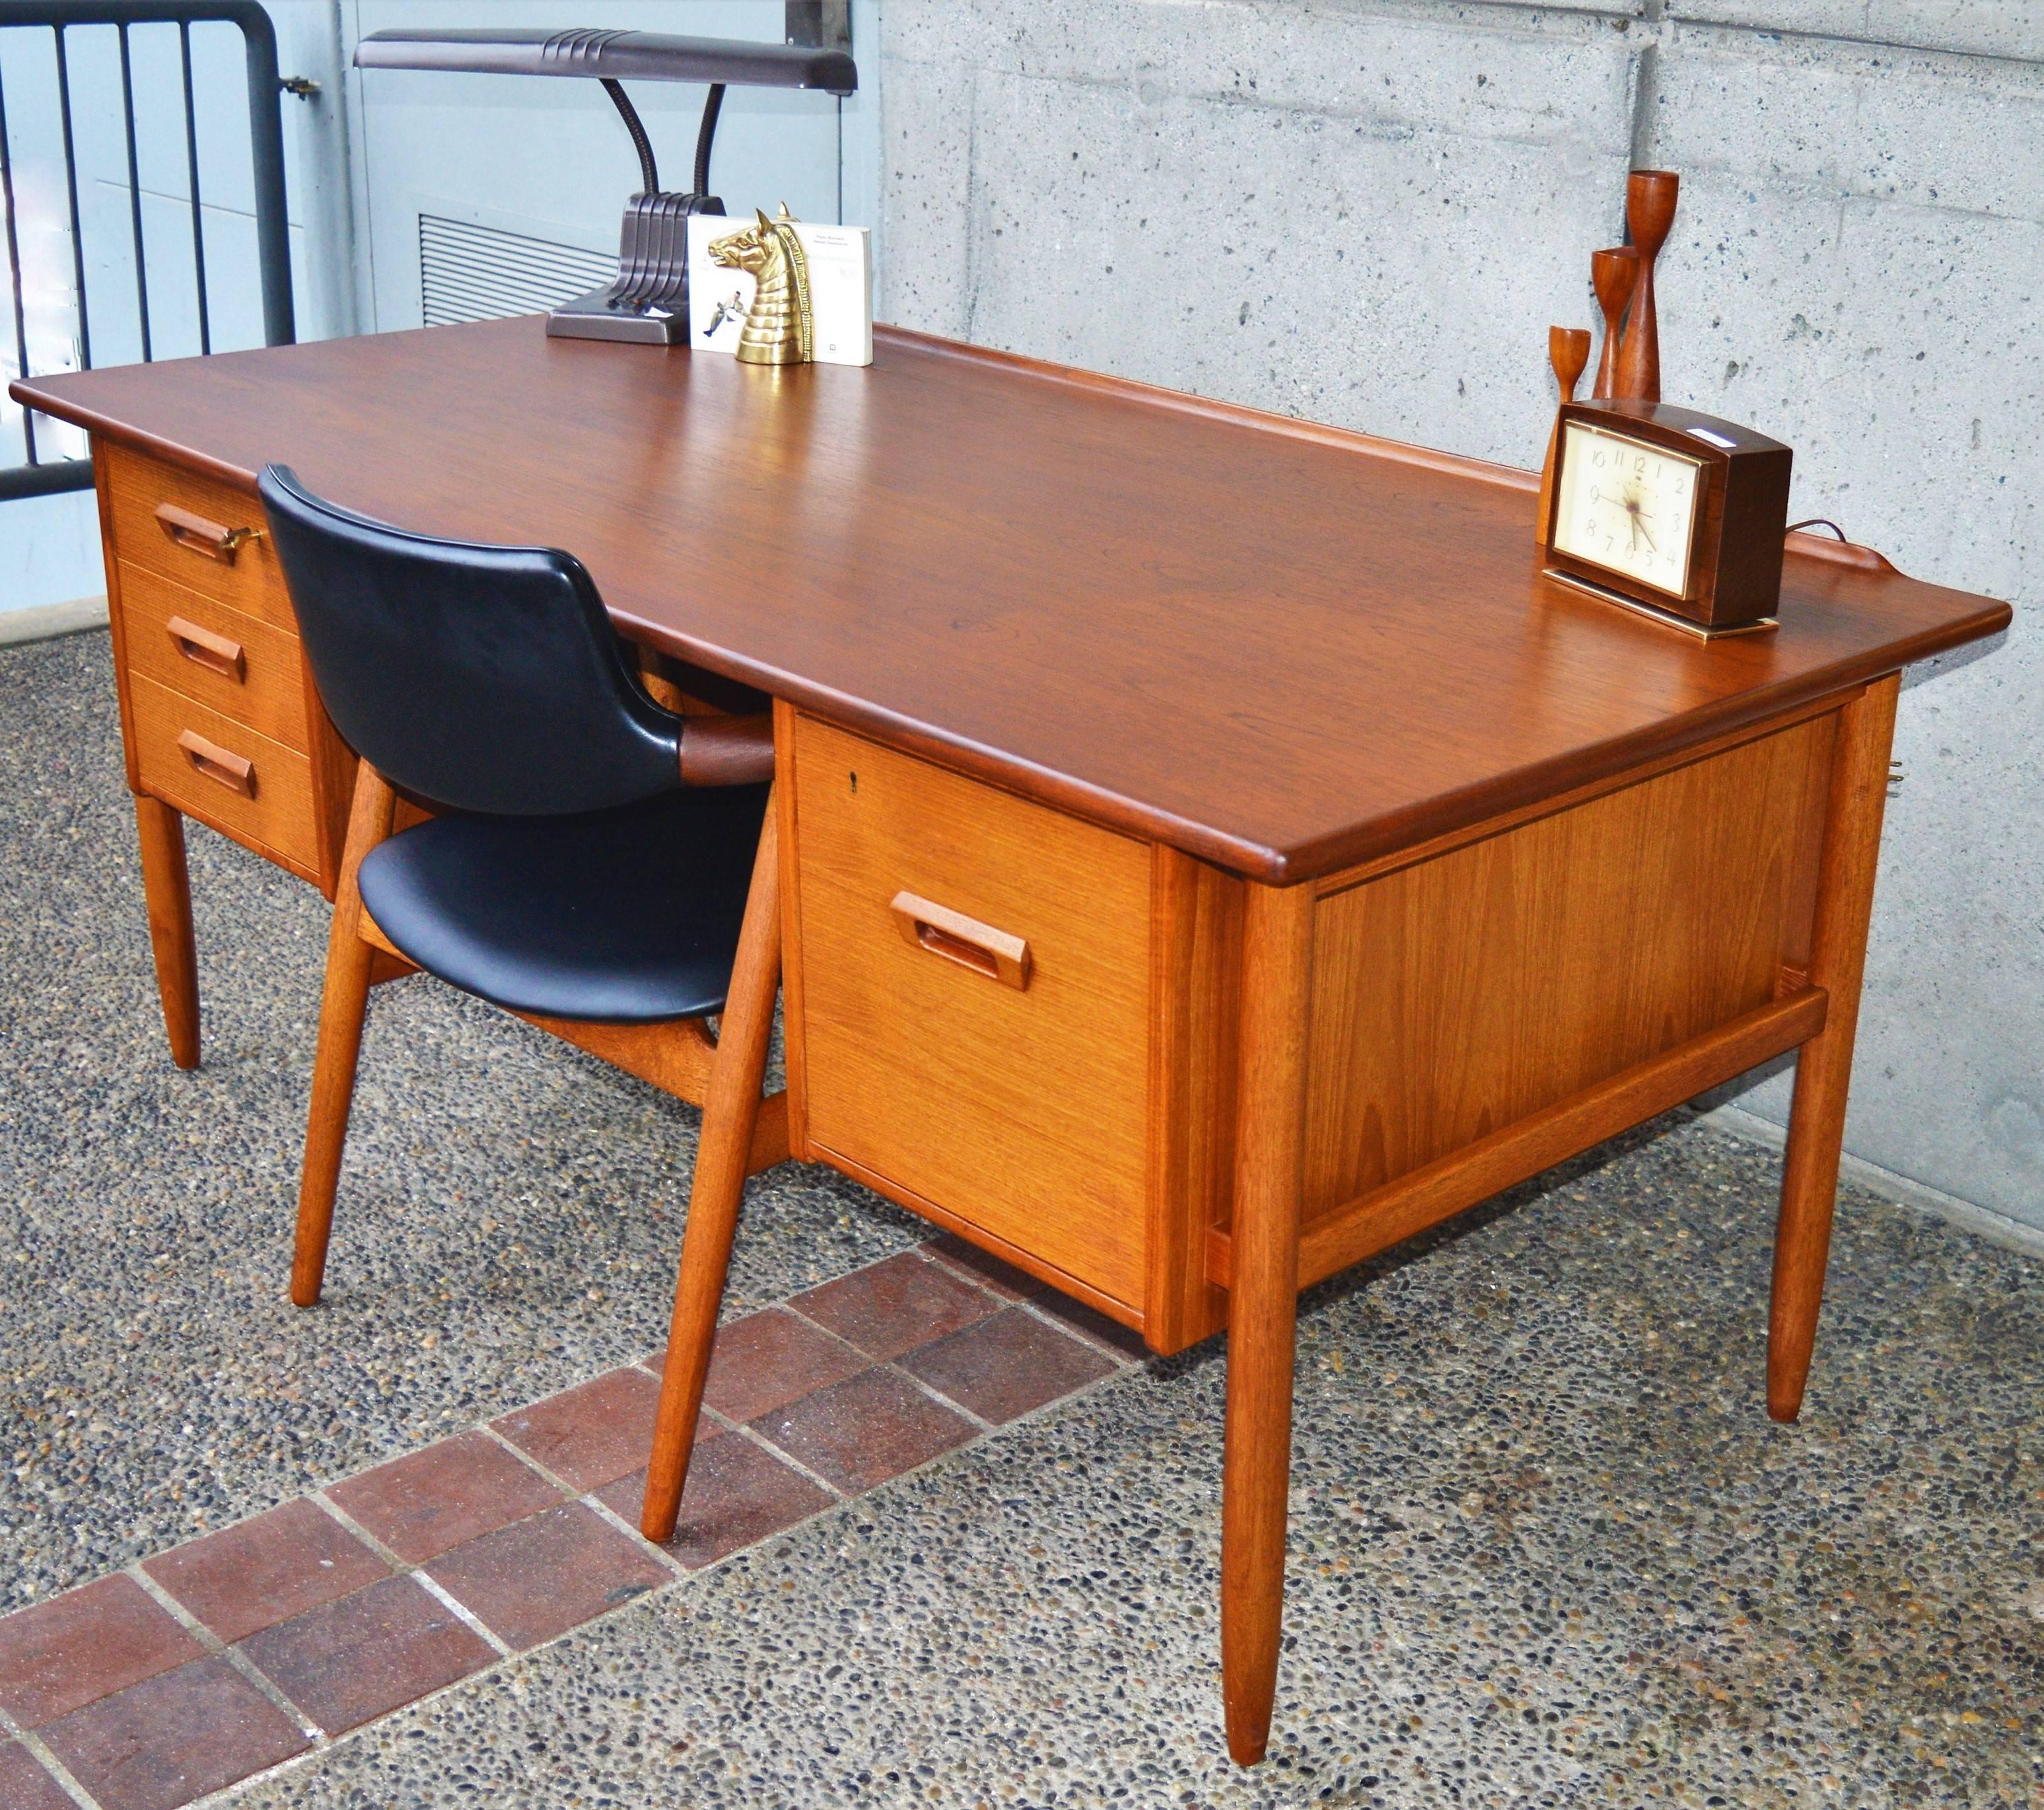 This gorgeous Danish modern quality teak desk was designed by Goran Strand for Lelangs Mobelfabrik, 1960s. Featuring a stellar curved lip at the back of the desk, floating leg braces, and a back display shelf with locking bar. This is the much rarer